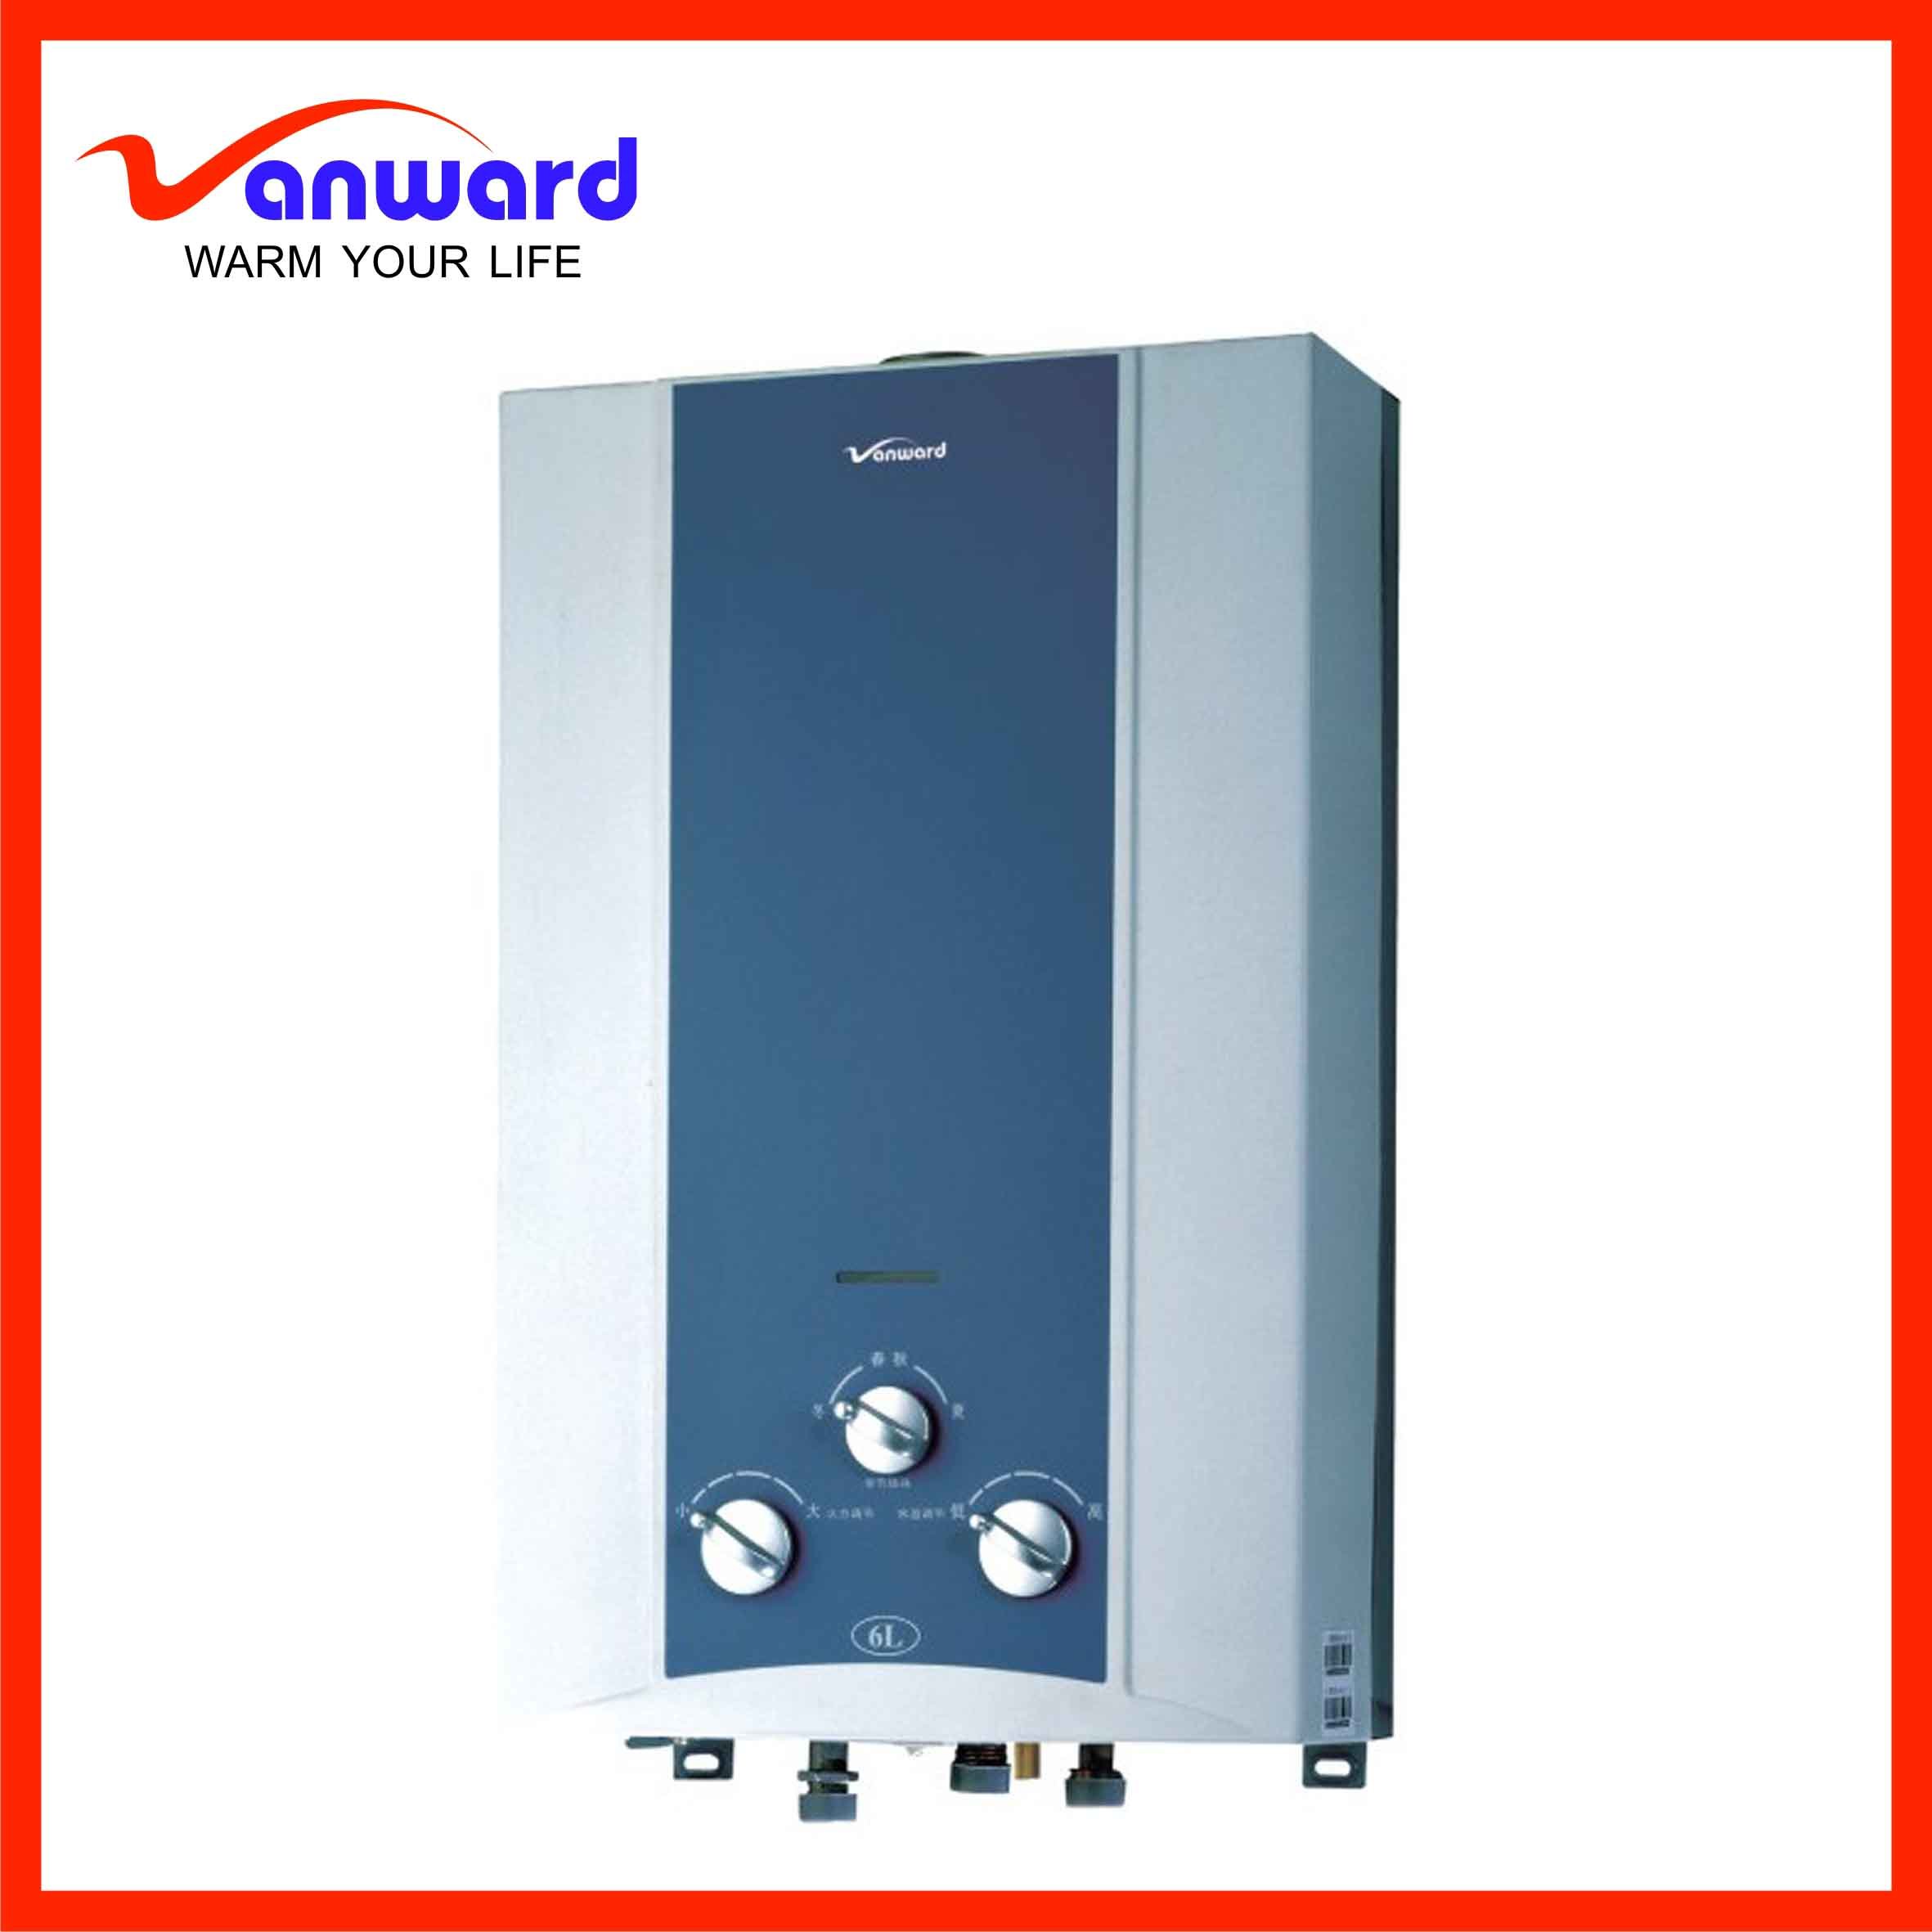 Professional OEM Gas Water Heater Manufacturer